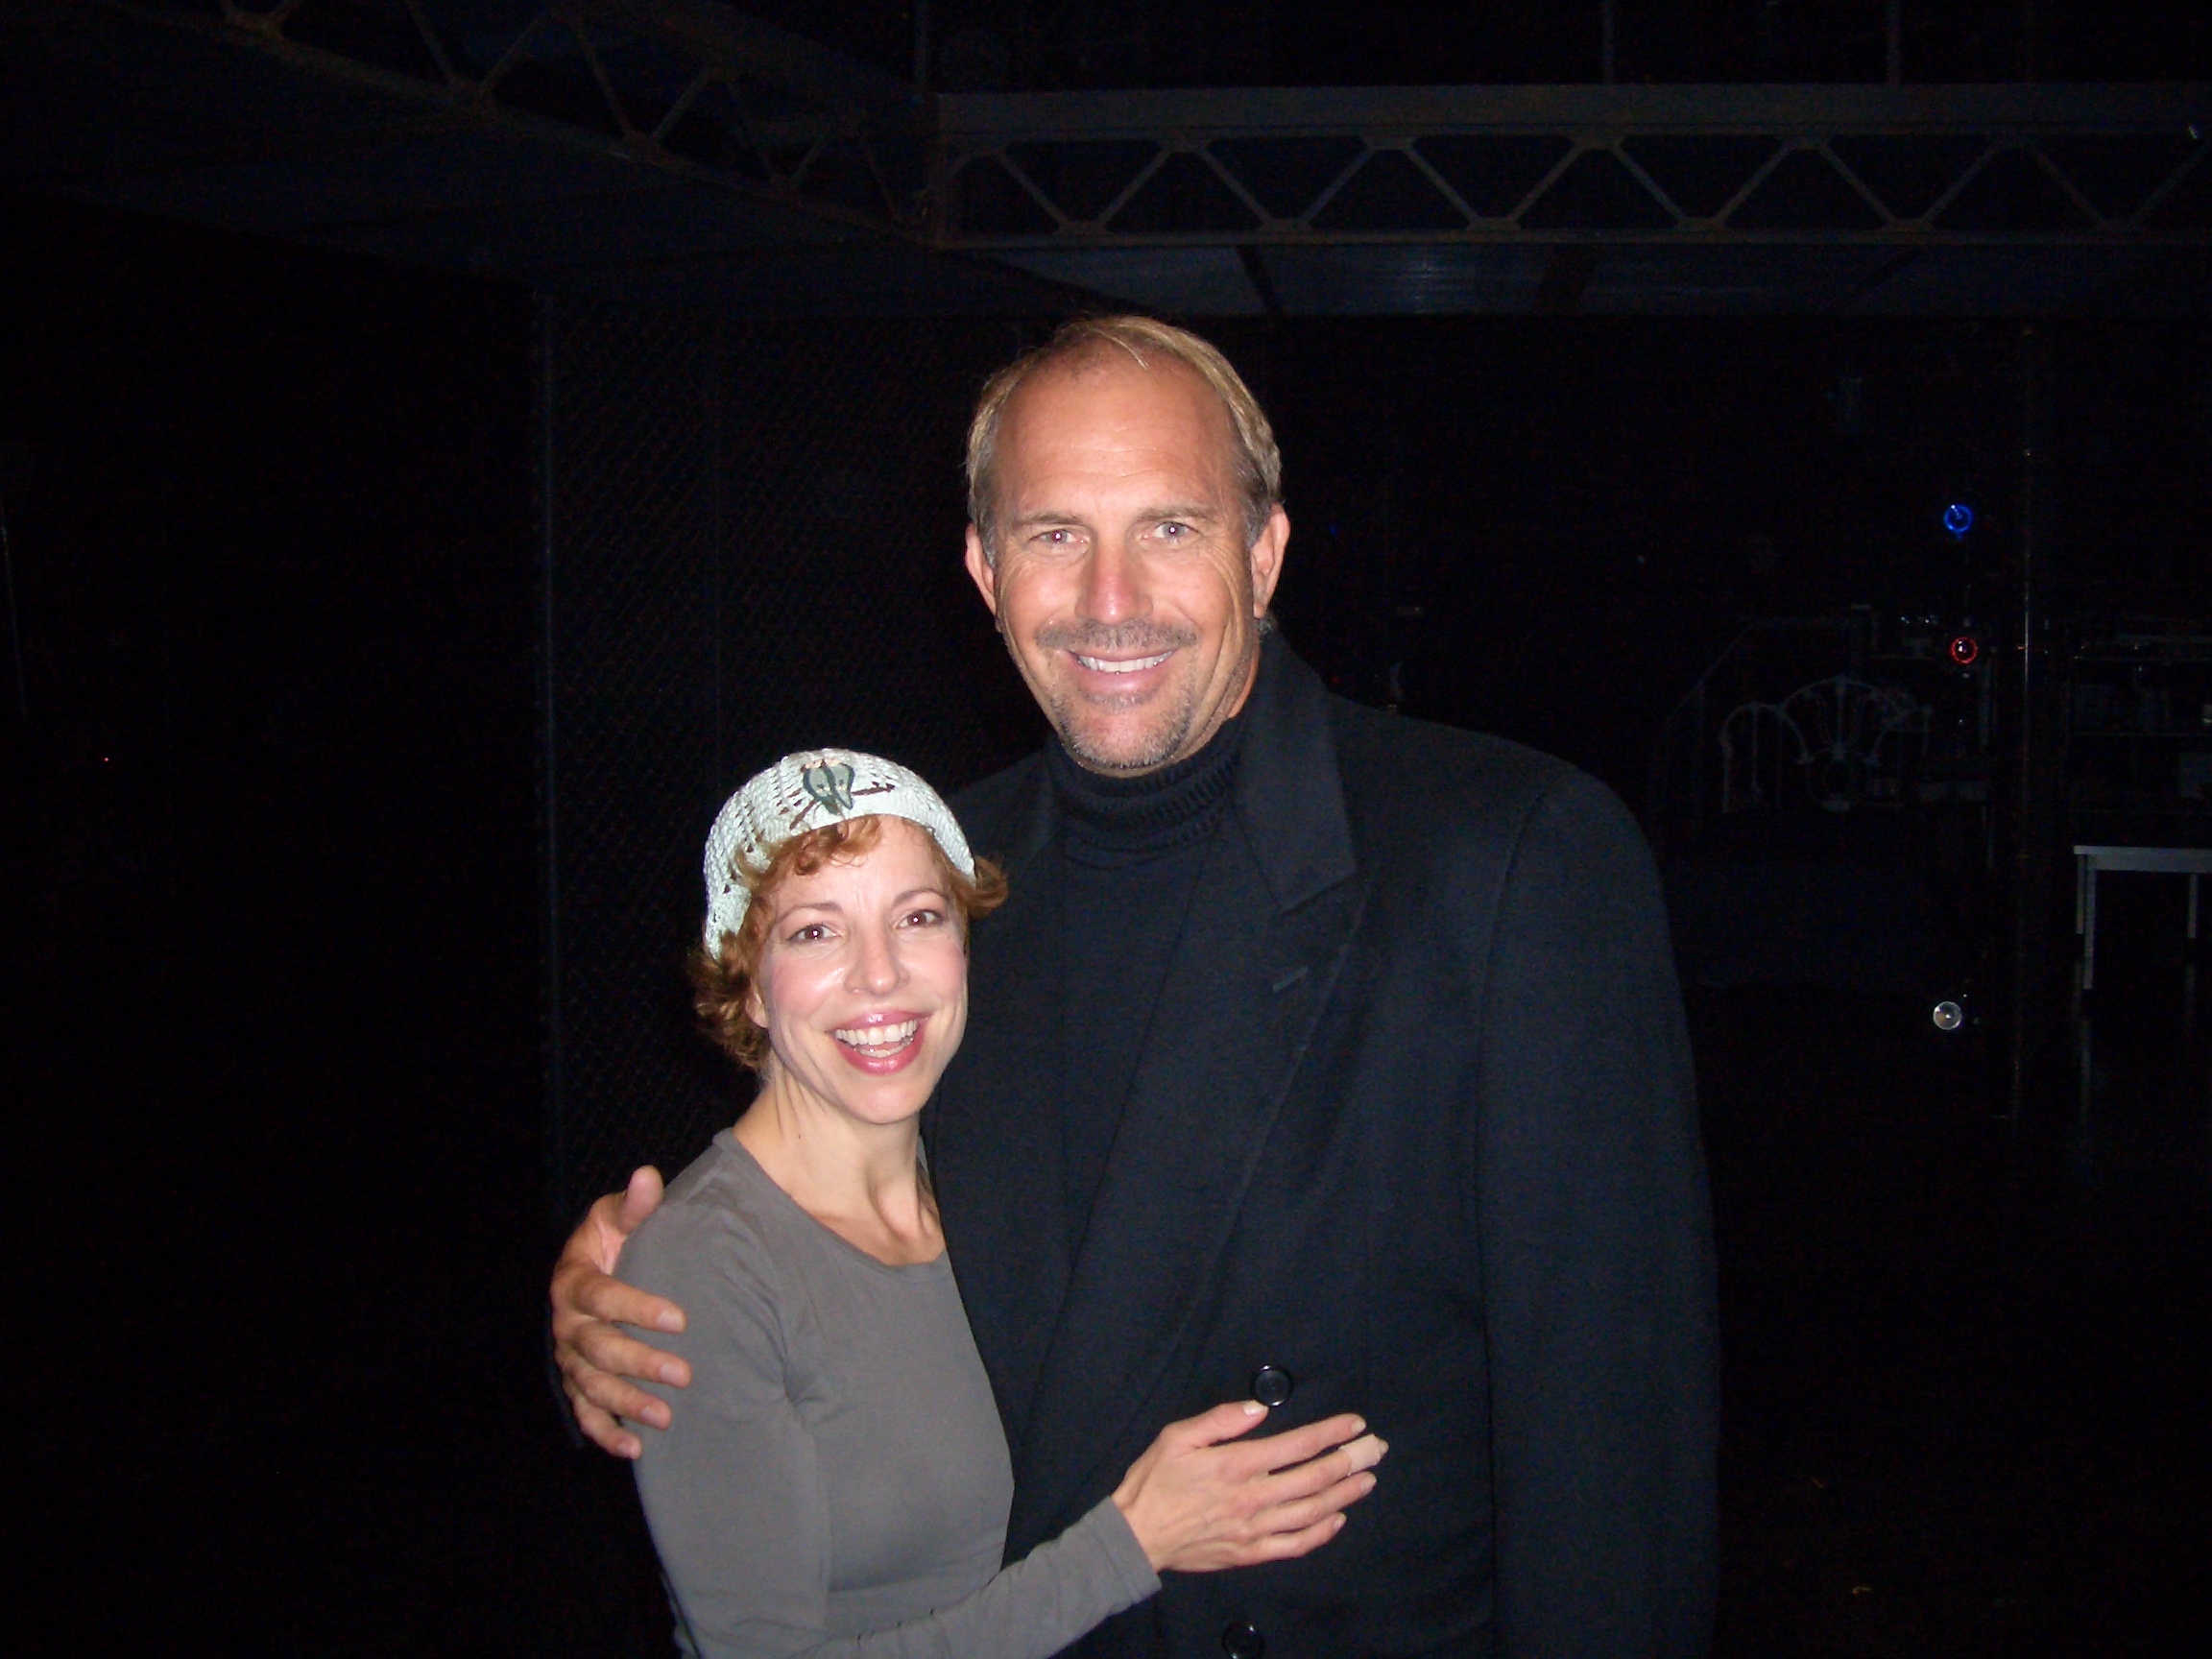 Kevin Costner and I after Jersey Boys show.